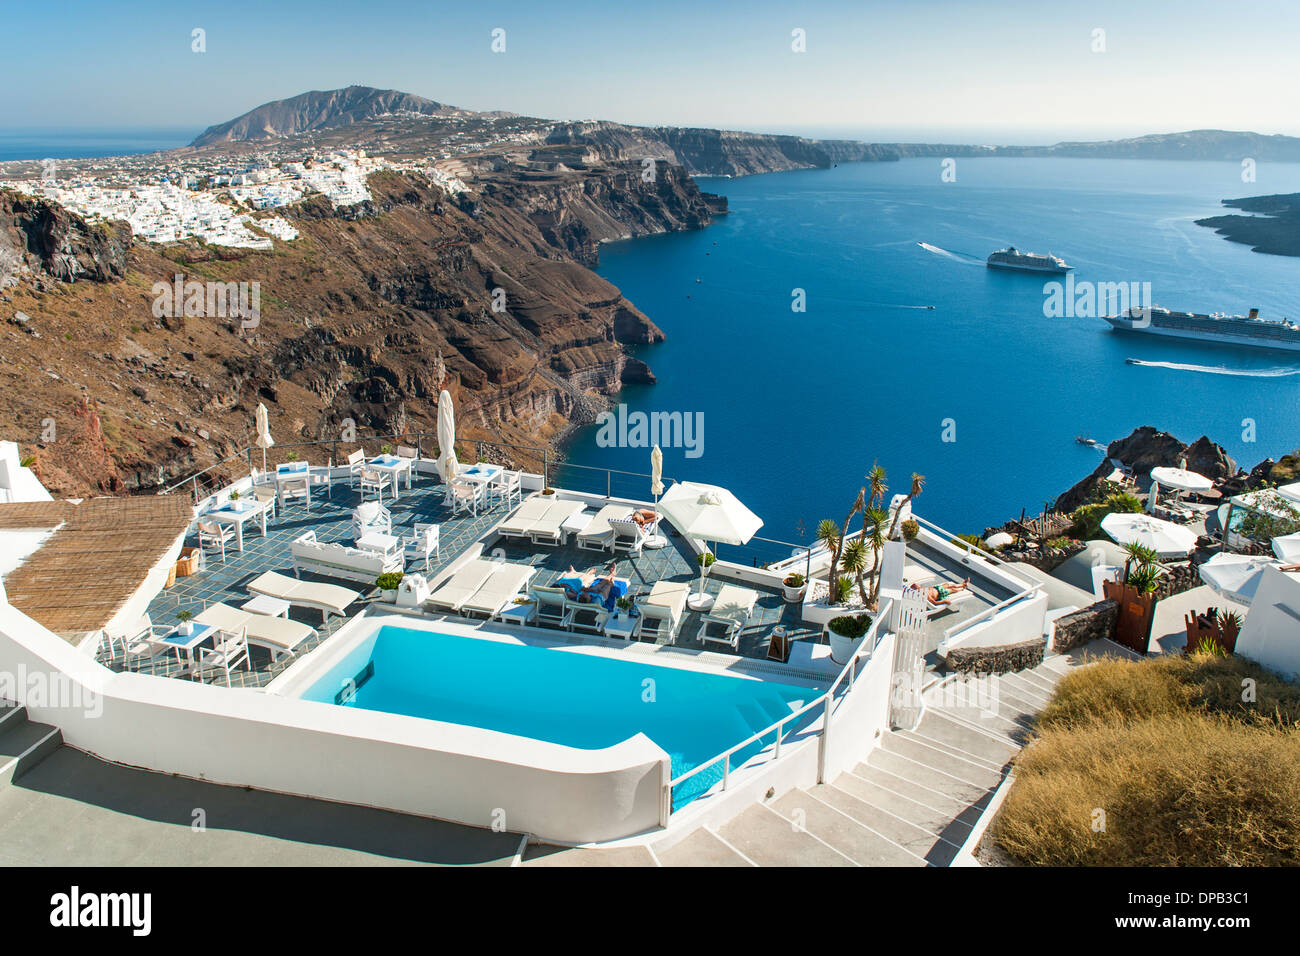 View from a house in Imerovigli on the Greek island of Santorini. Stock Photo